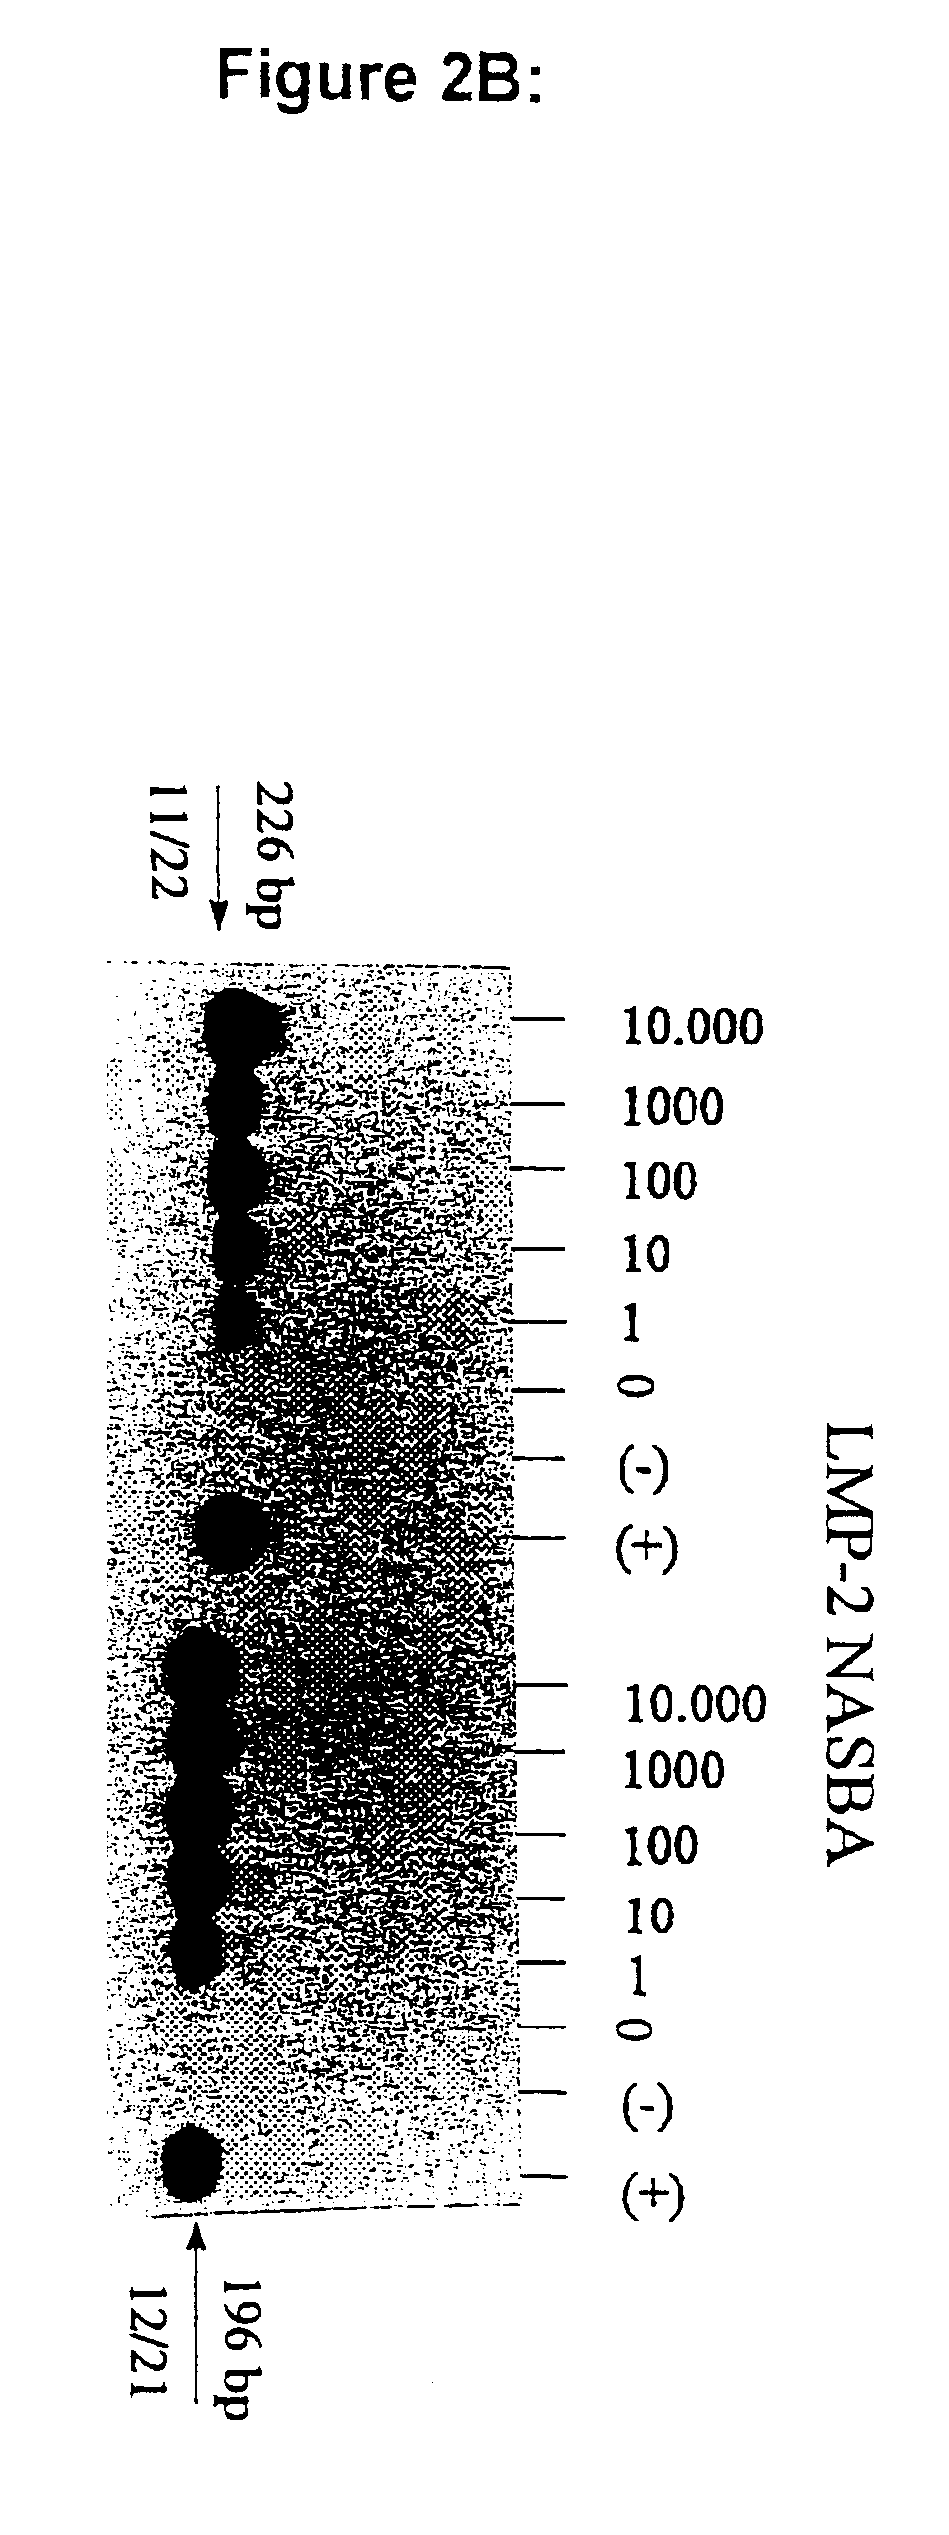 Oligonucleotides for the amplification and detection of Epstein Barr Virus (EBV) nucleic acid